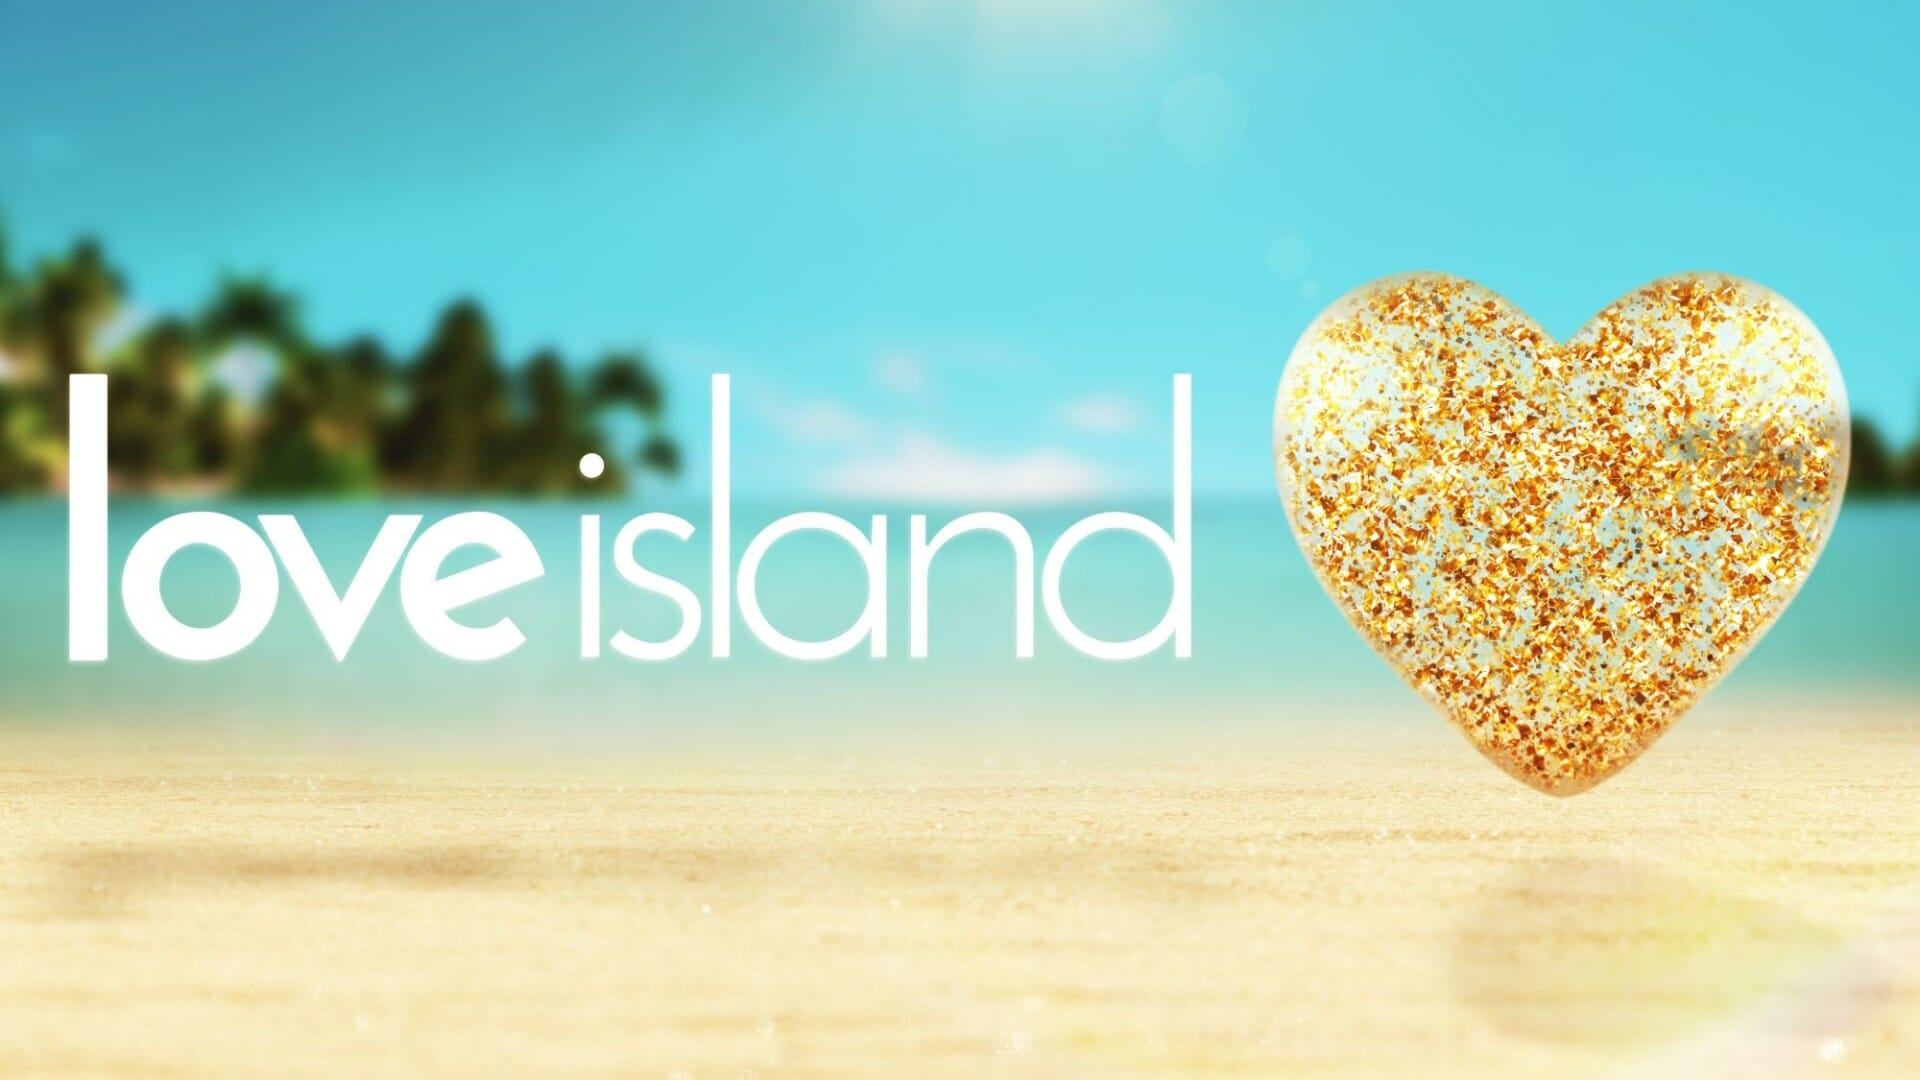 Love Island couple in shock split as star says she's 'gutted our journey has come to an end'